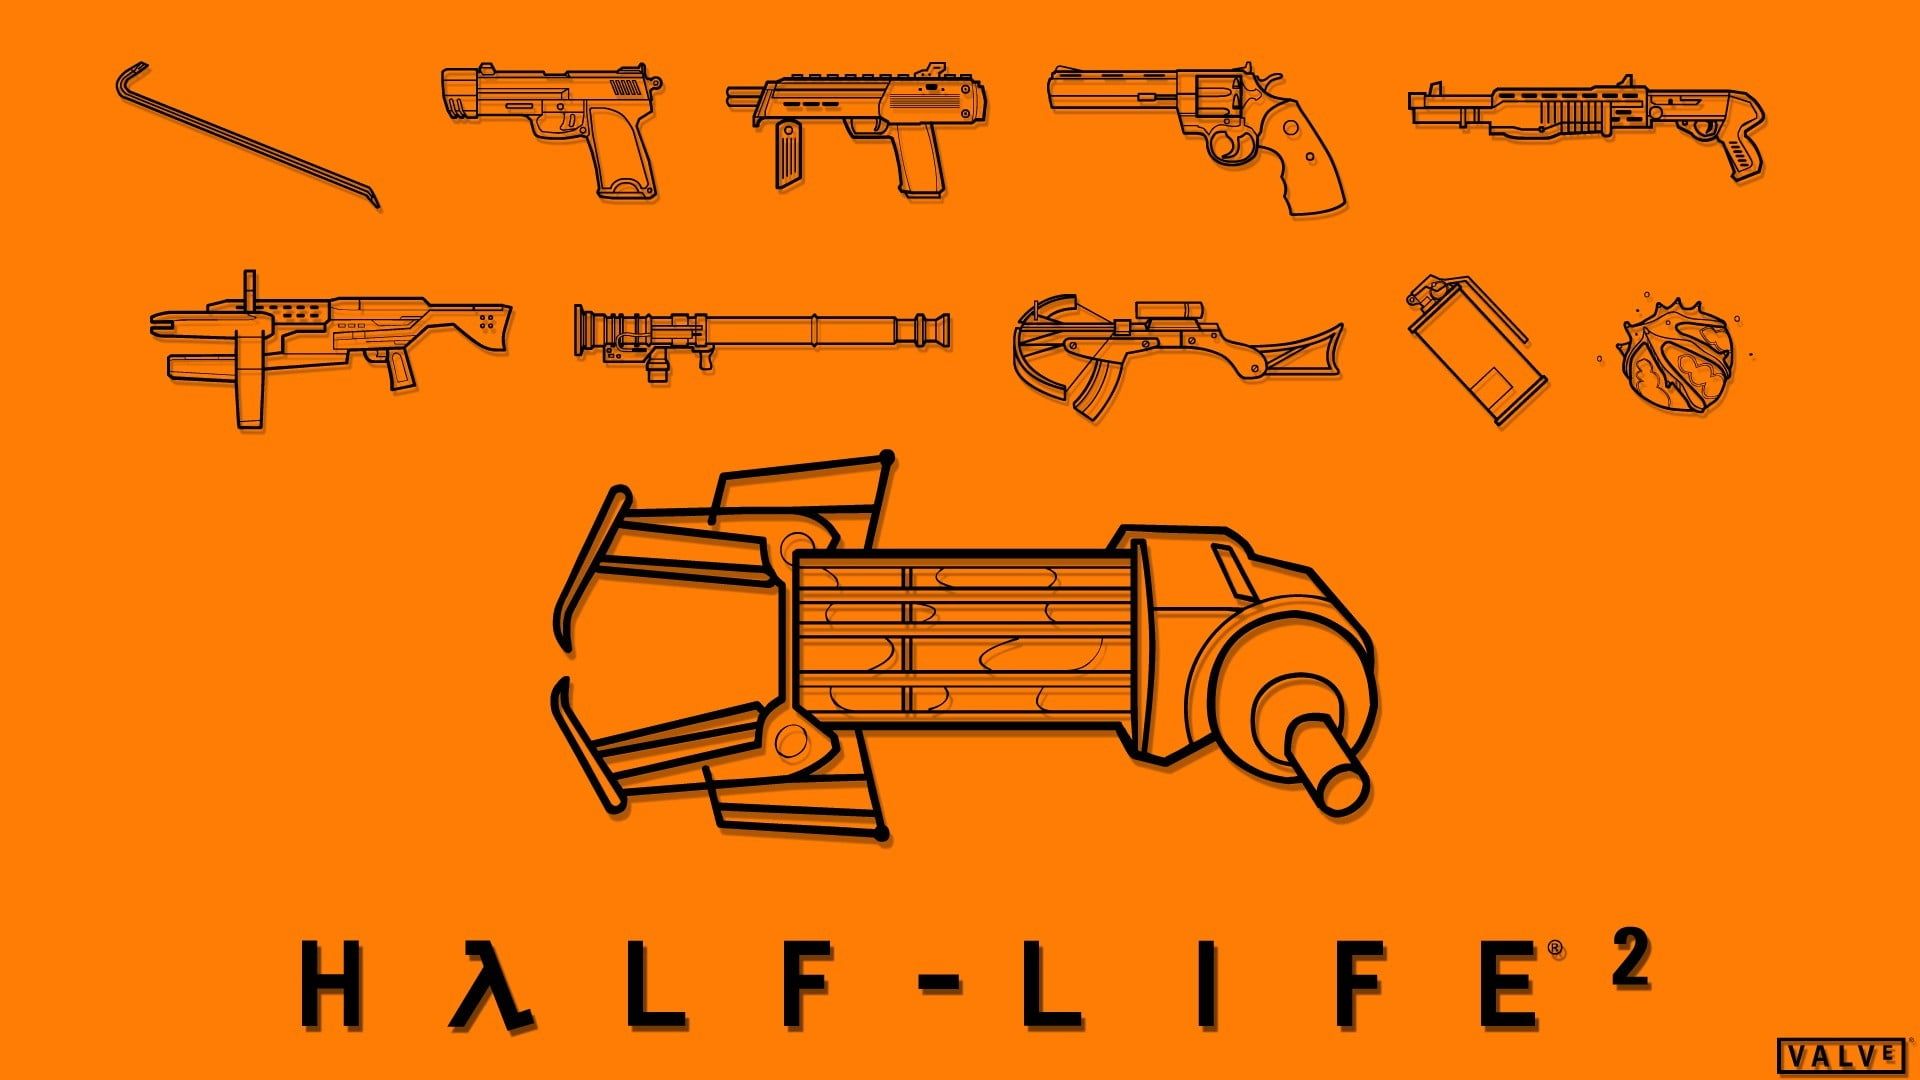 Half Life 2 Weapon Illustration With Text Overlay Half Life 2 Valve Corporation Video Games #weapon #orange P #wallpape. Overlays, Text Overlay, HD Wallpaper